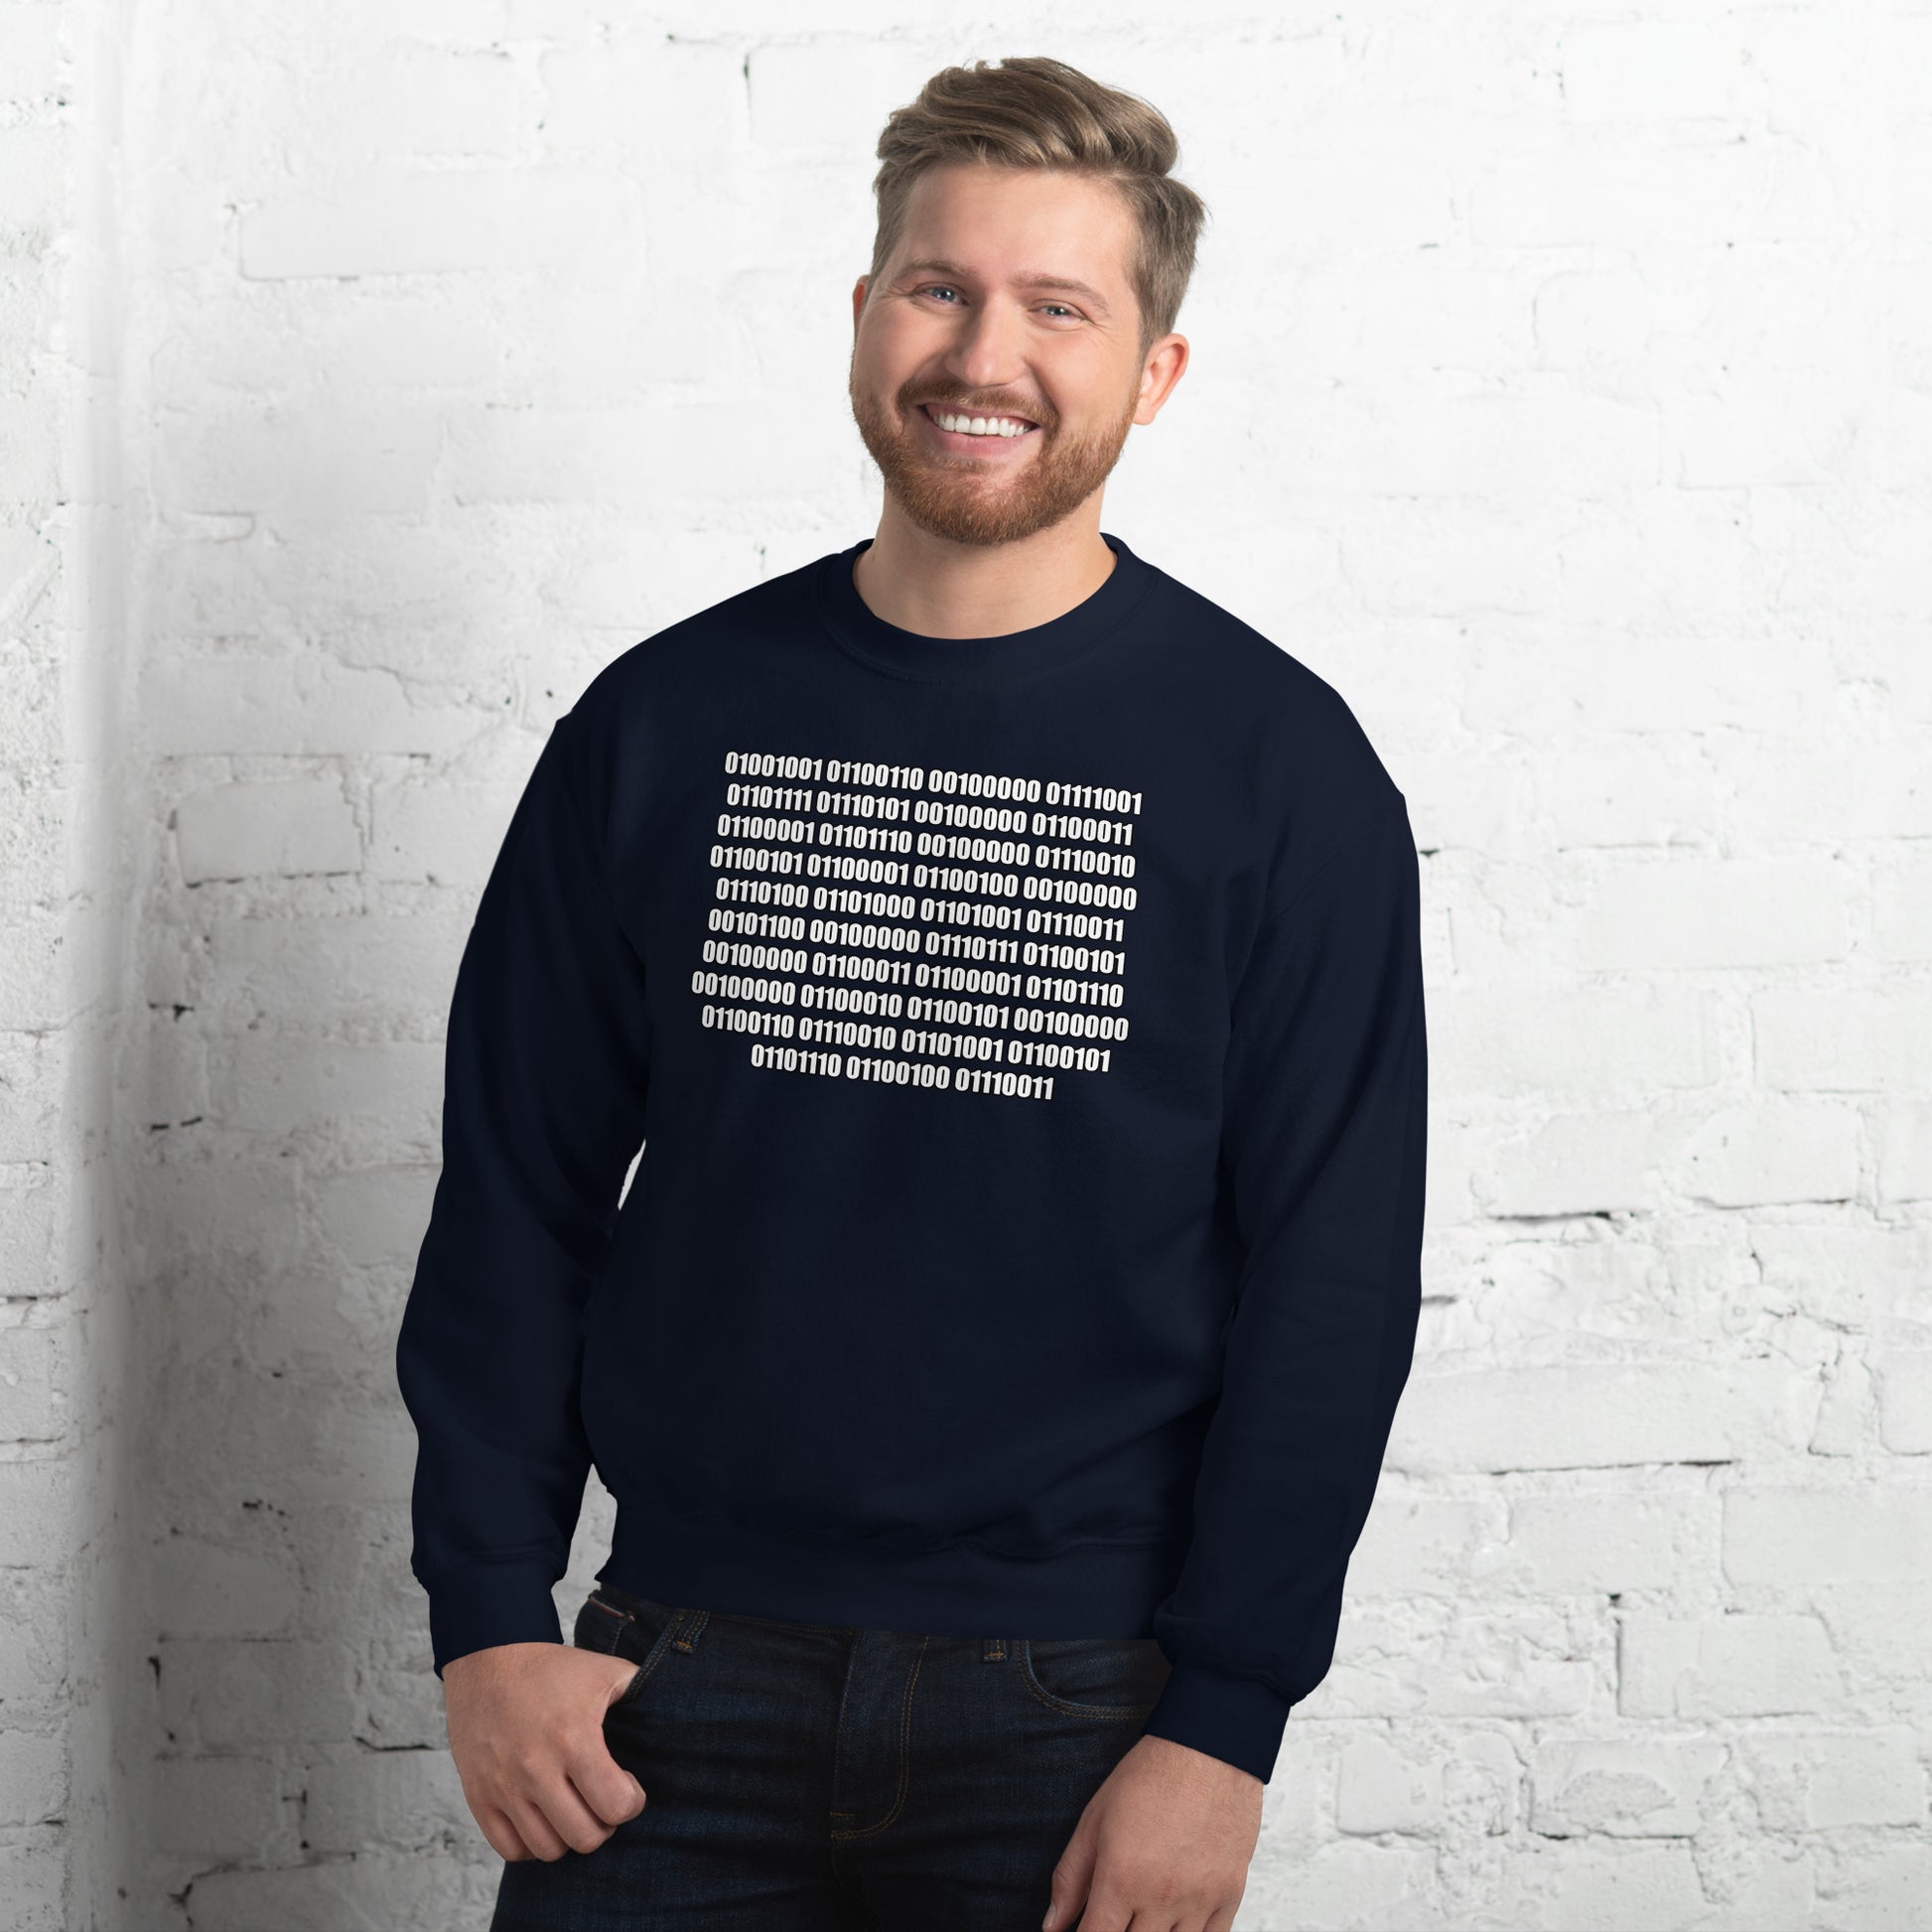 Men with navy sweatshirt with binaire text "If you can read this"